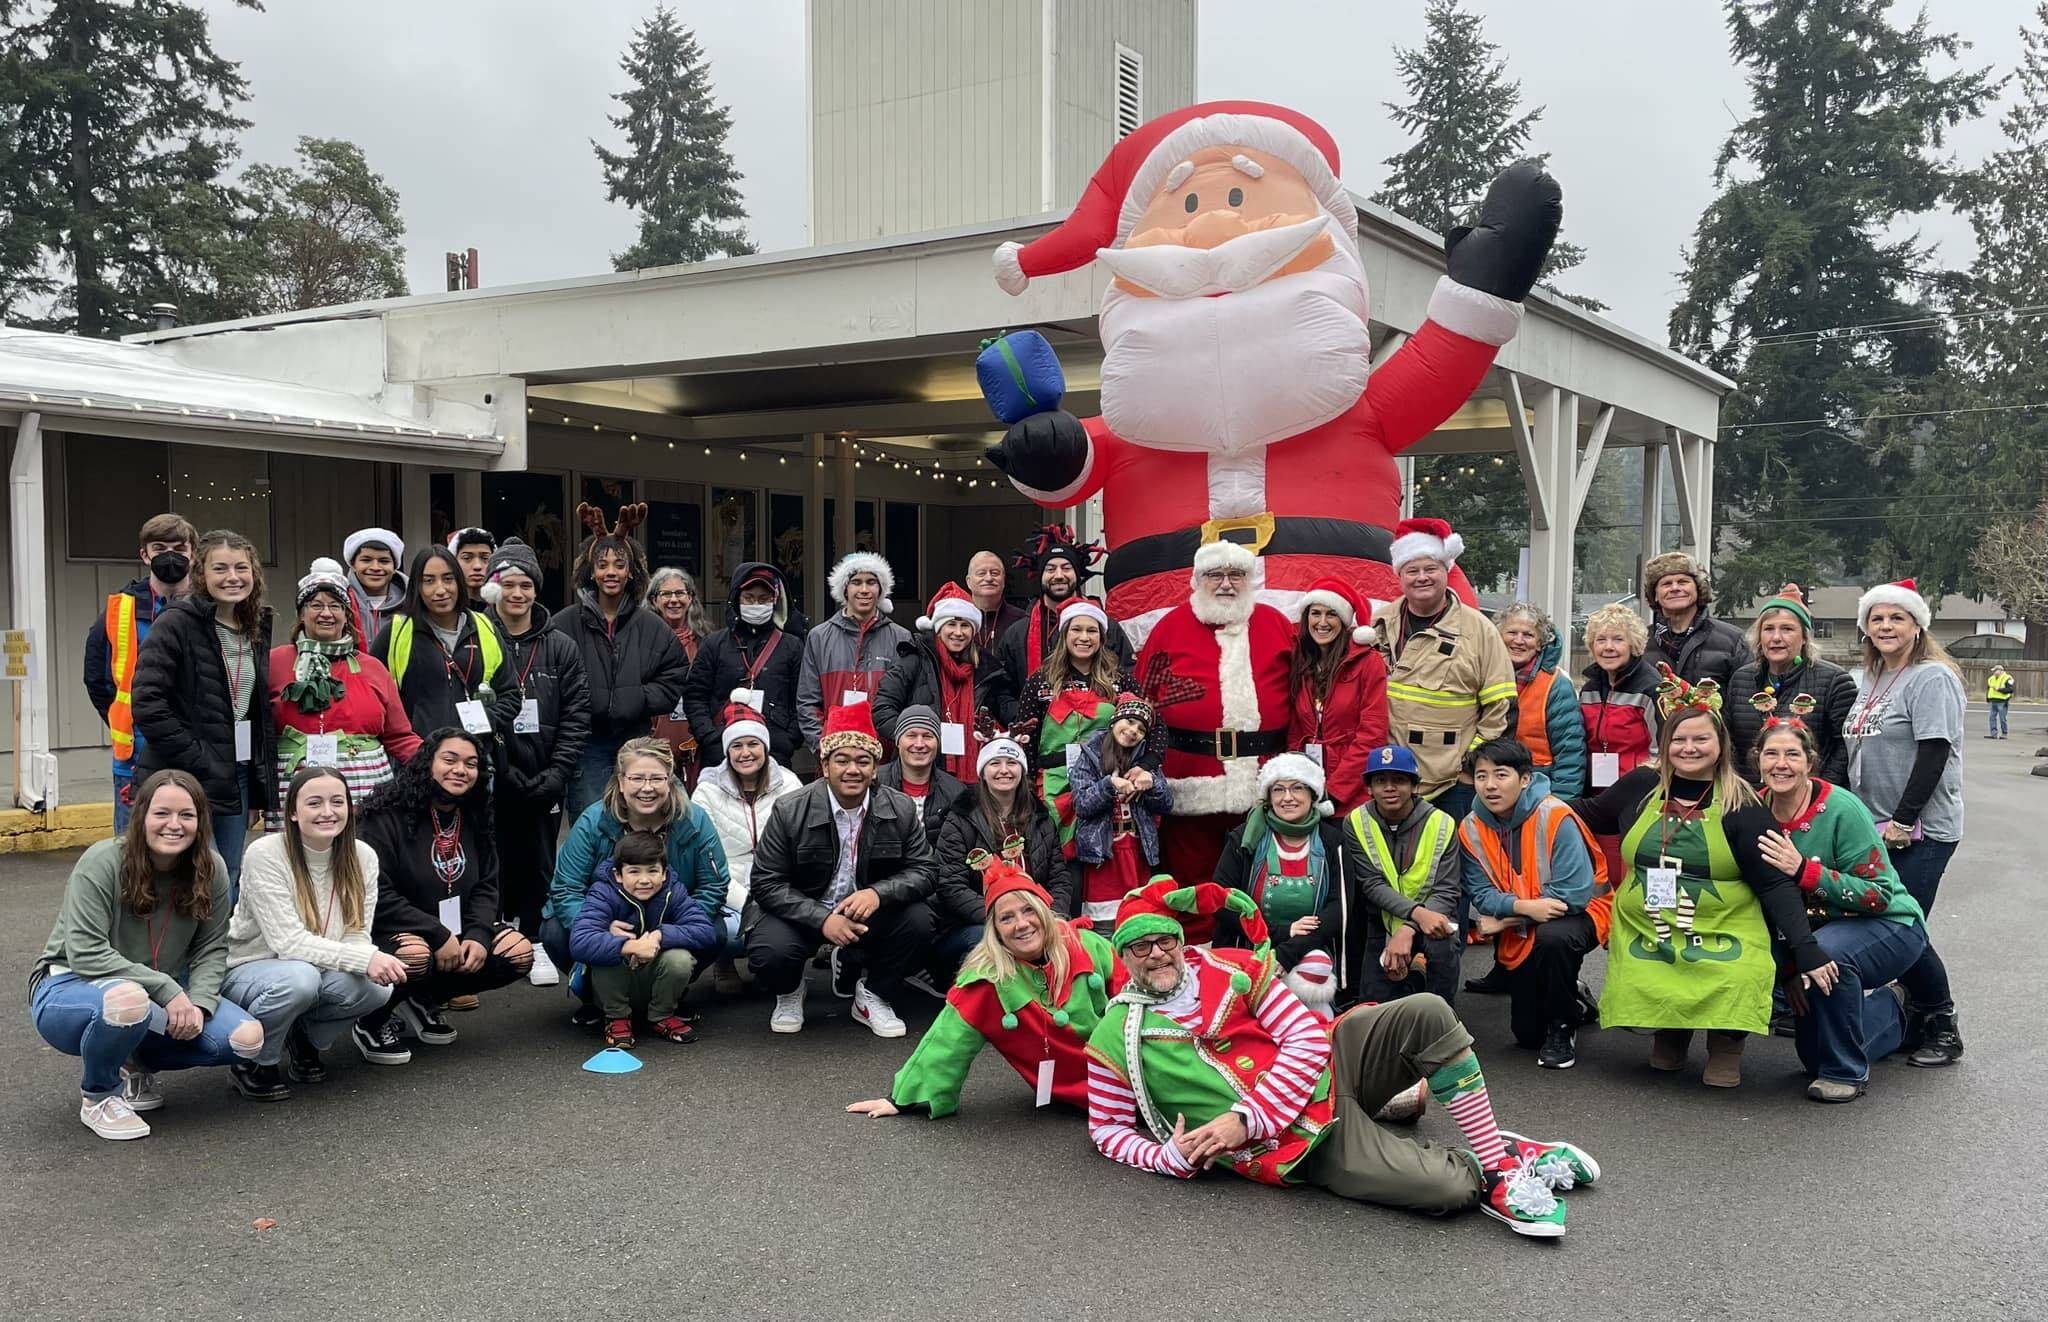 Volunteers from South King Fire and Rescue, the City of Federal Way and We Love Our City gathered at the Federal Way Cares for Kids event at Grace Church in Federal Way. Photo courtesy of South King Fire and Rescue